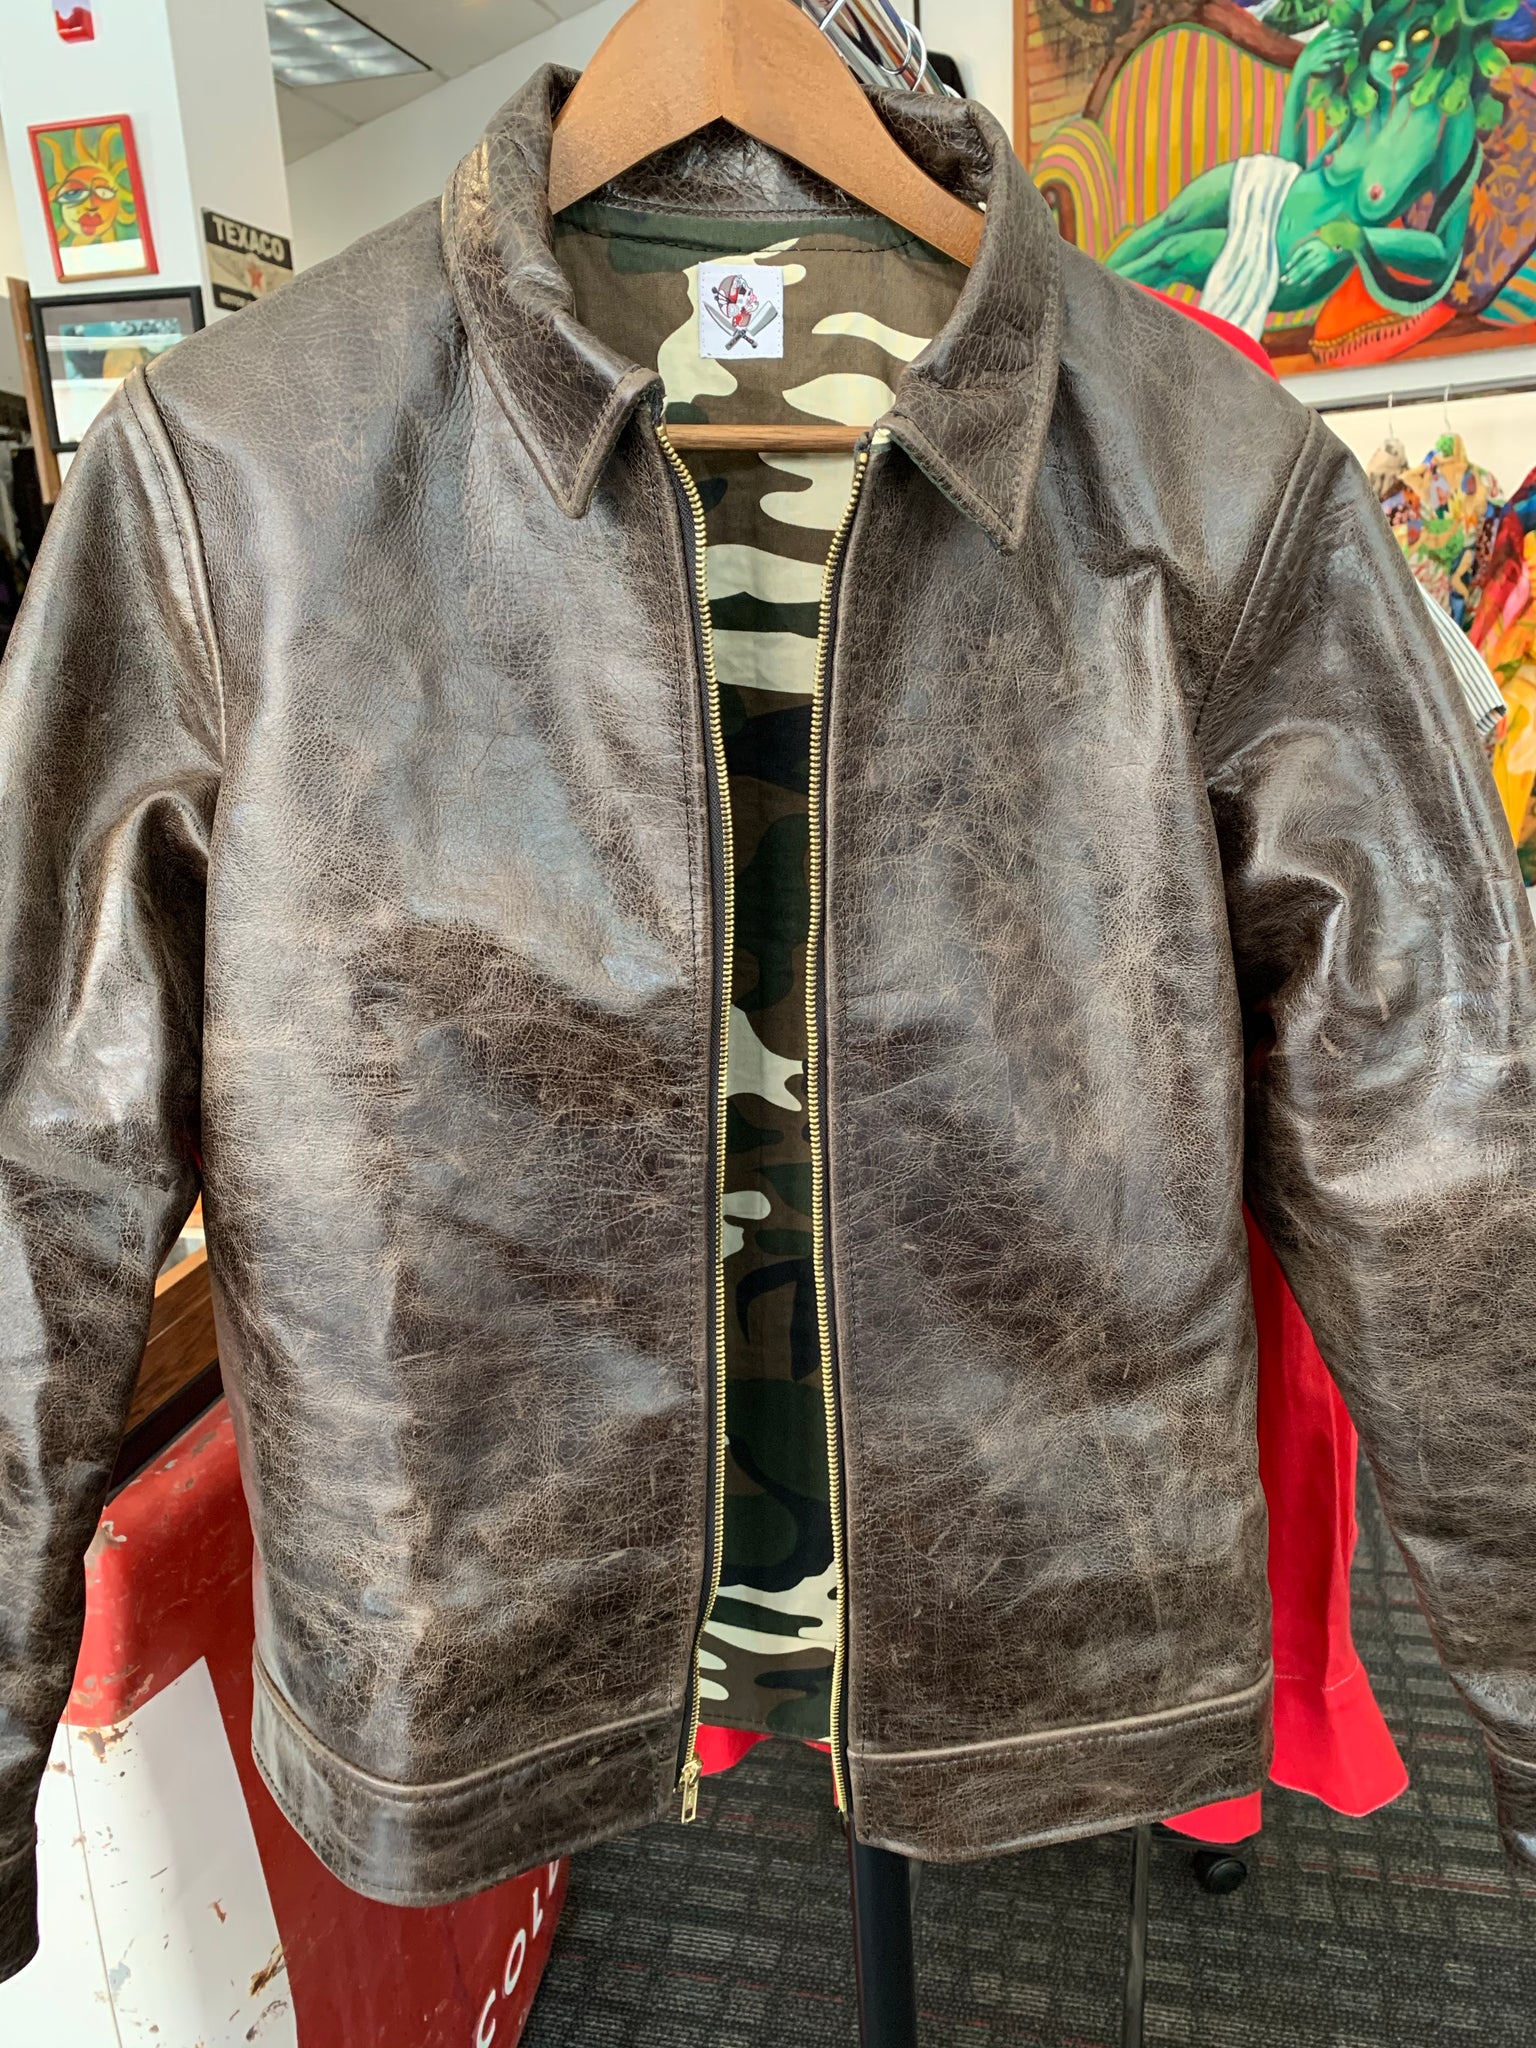 The getaway driver leather jacket